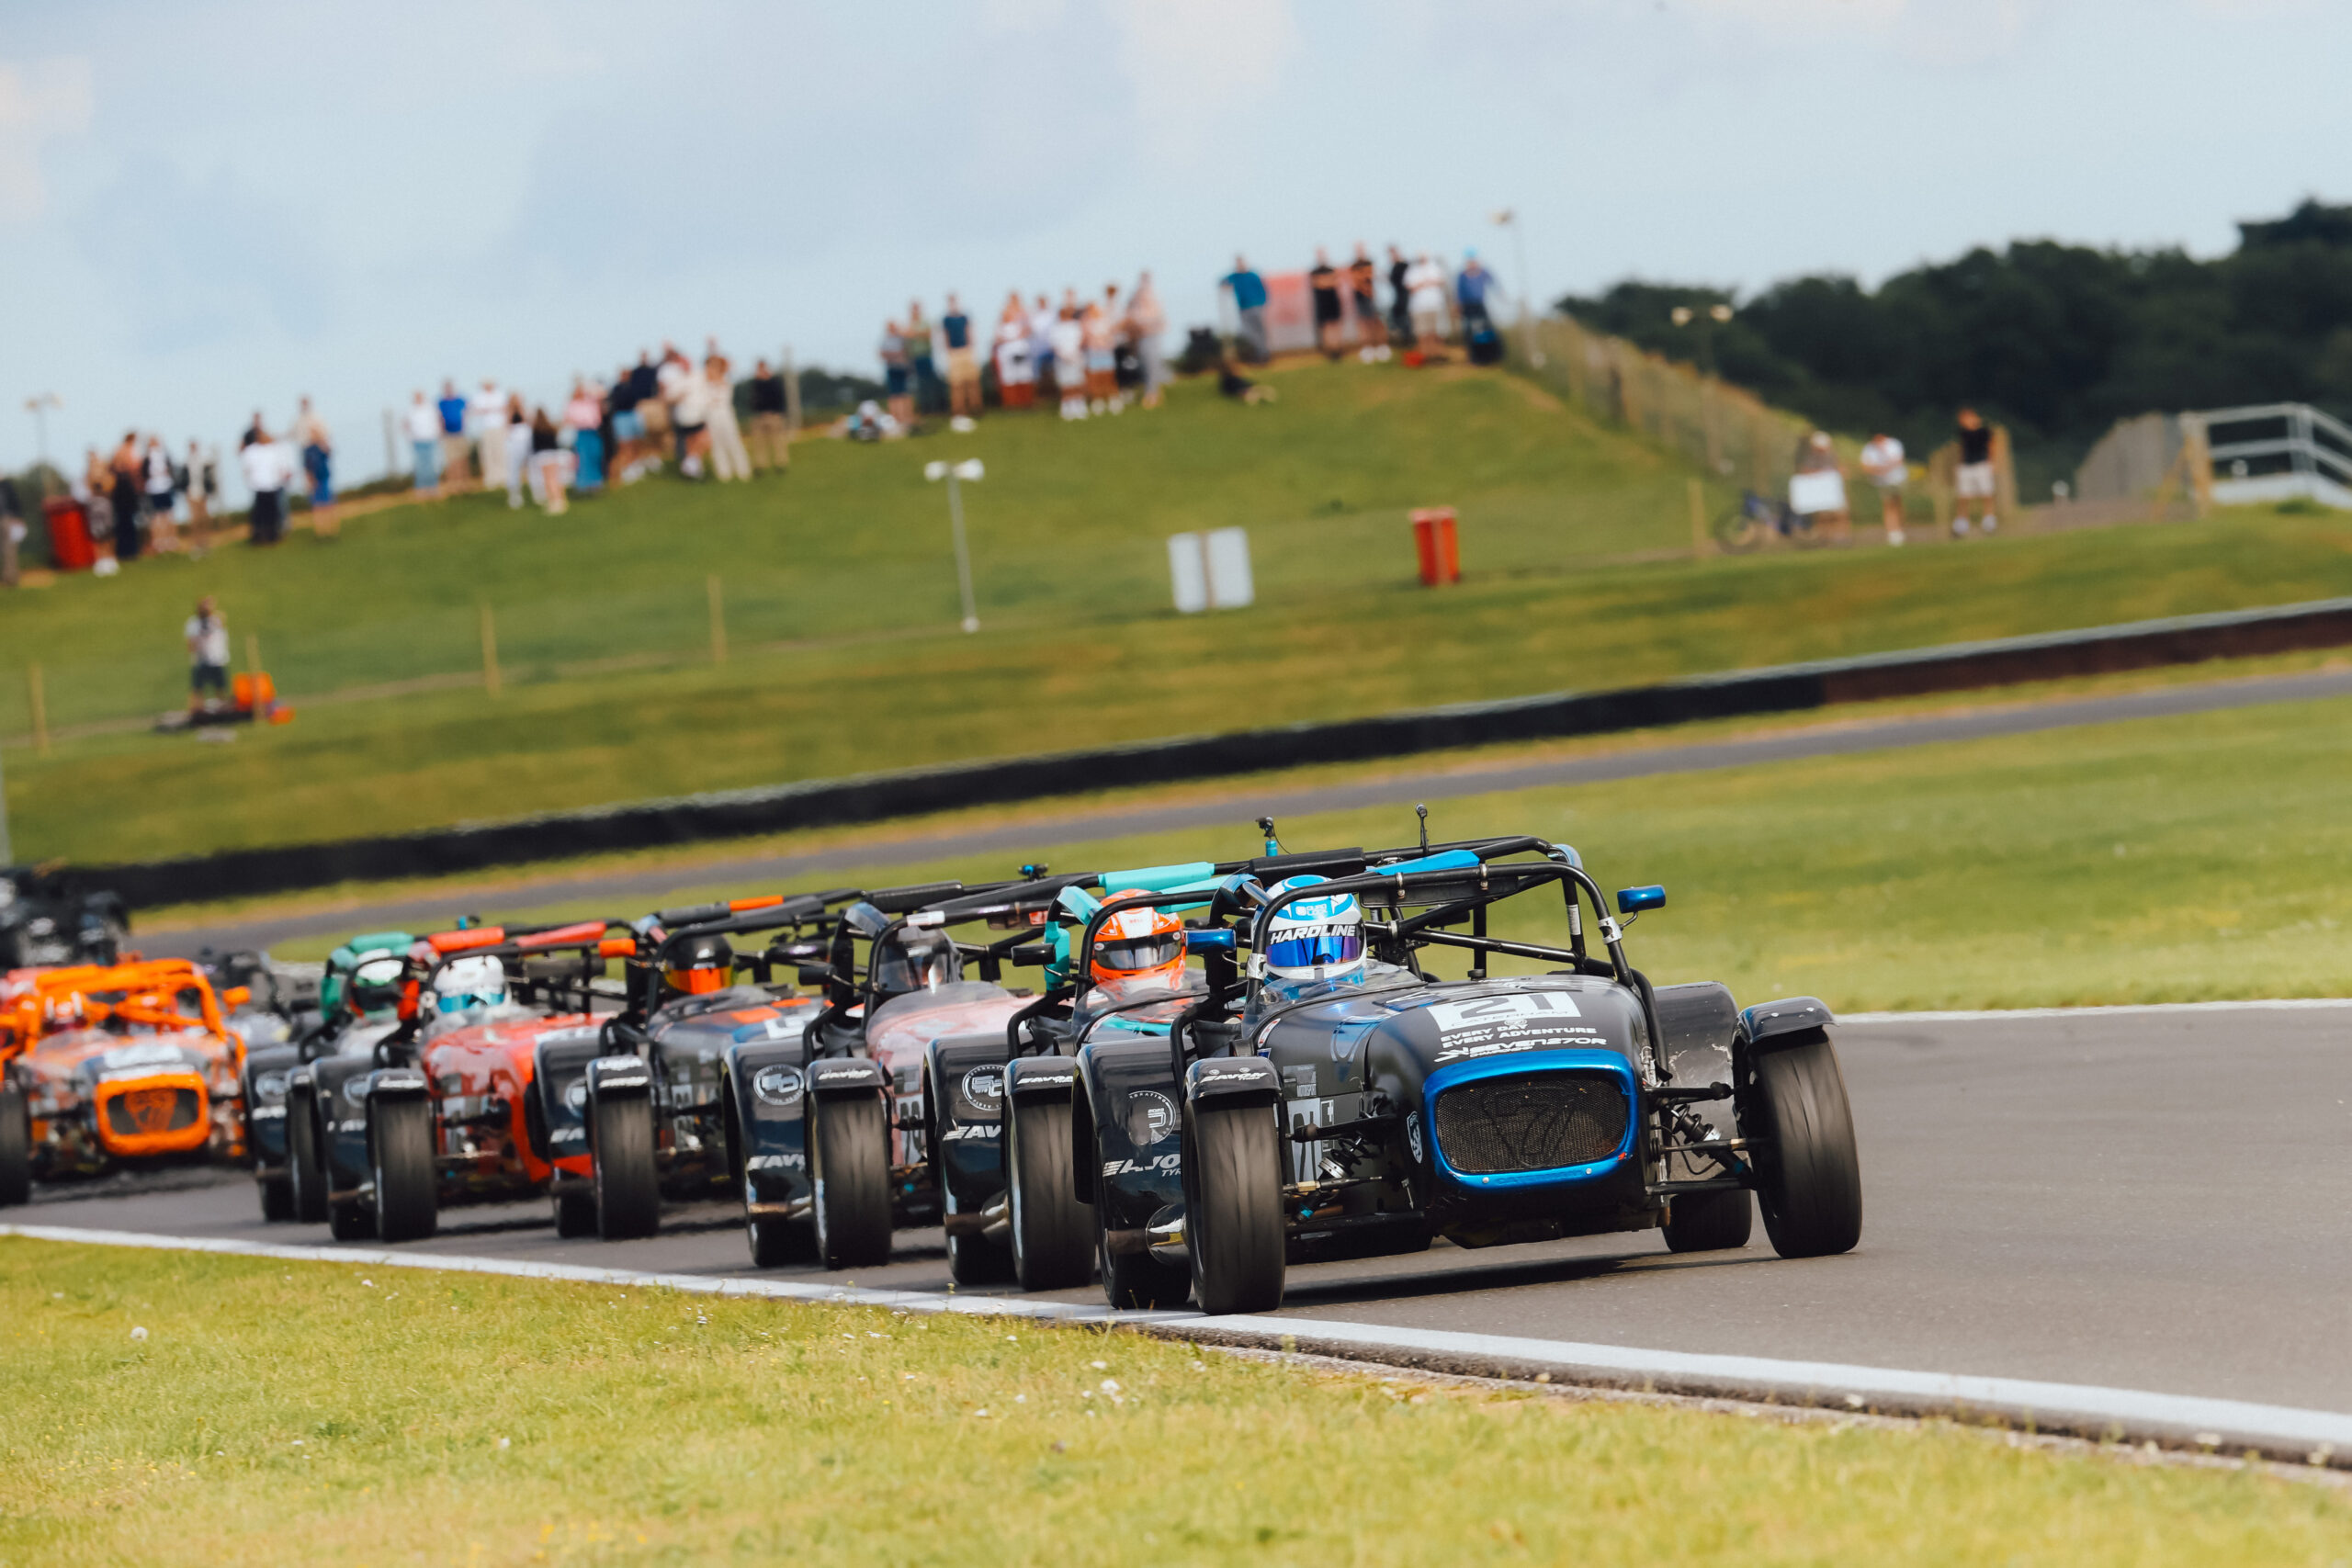 EBC-Equipped Caterham Racers Stay at Front of Pack at Snetterton Round